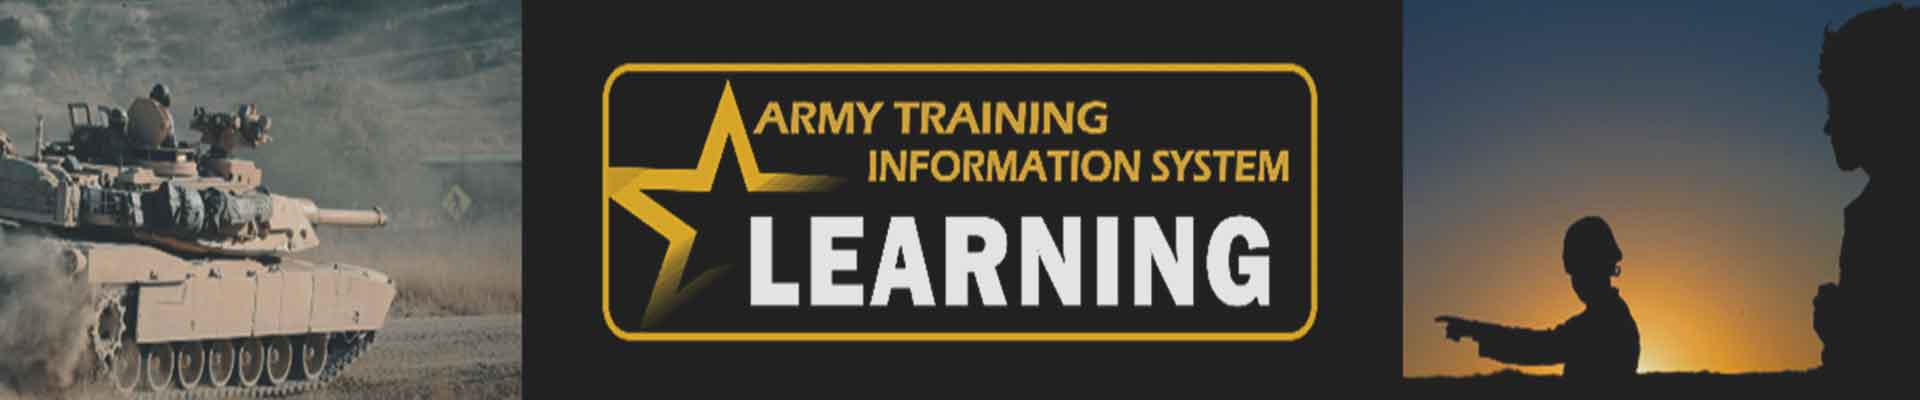 A composite graphic showing a tank on the left, a central badge reading "army training information system - learning," and a silhouette of a soldier on the right against a sunset. Sign for "army training information system - learning" on a camouflage background. ATIS is the only portal for Army Mandatory Training.